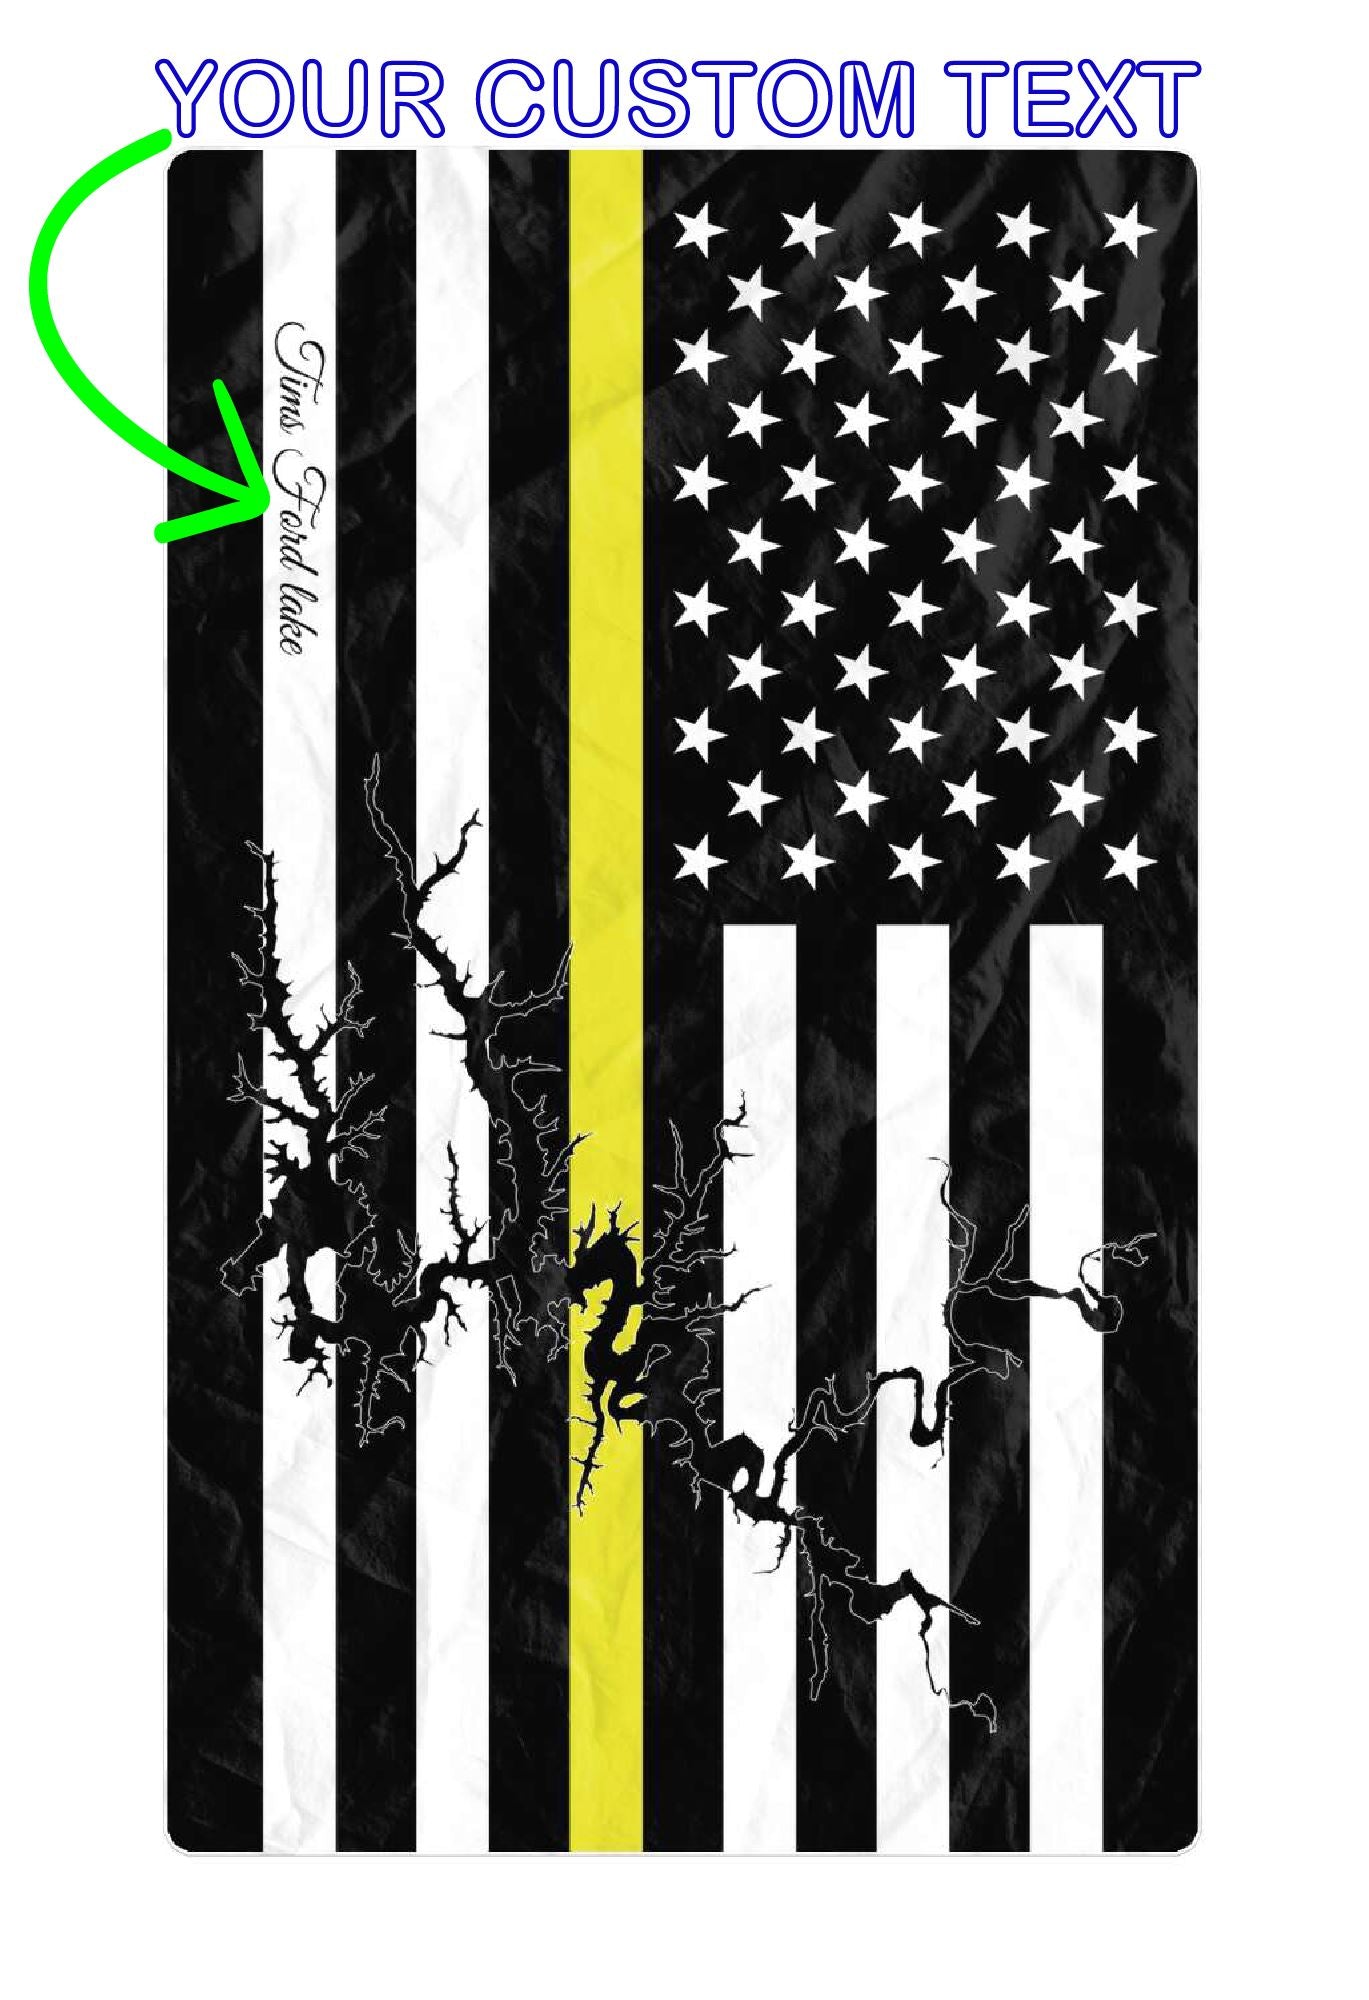 Tims Ford lake Oversized Beach Towel - Thin Yellow Line – Personalized Freeform Beach Towel - AOP 